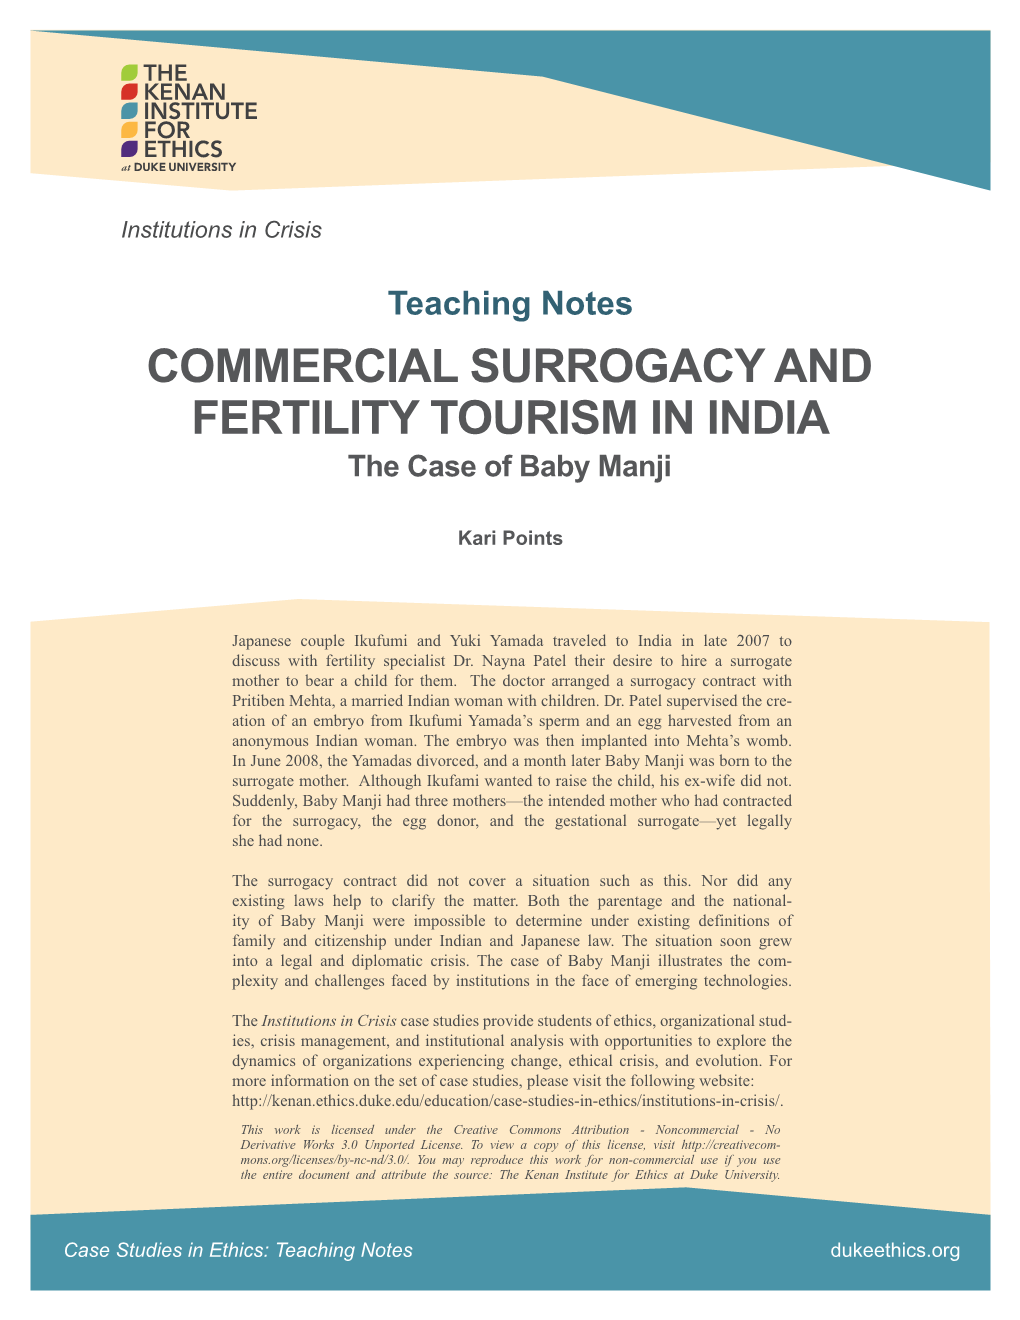 COMMERCIAL SURROGACY and FERTILITY TOURISM in INDIA the Case of Baby Manji